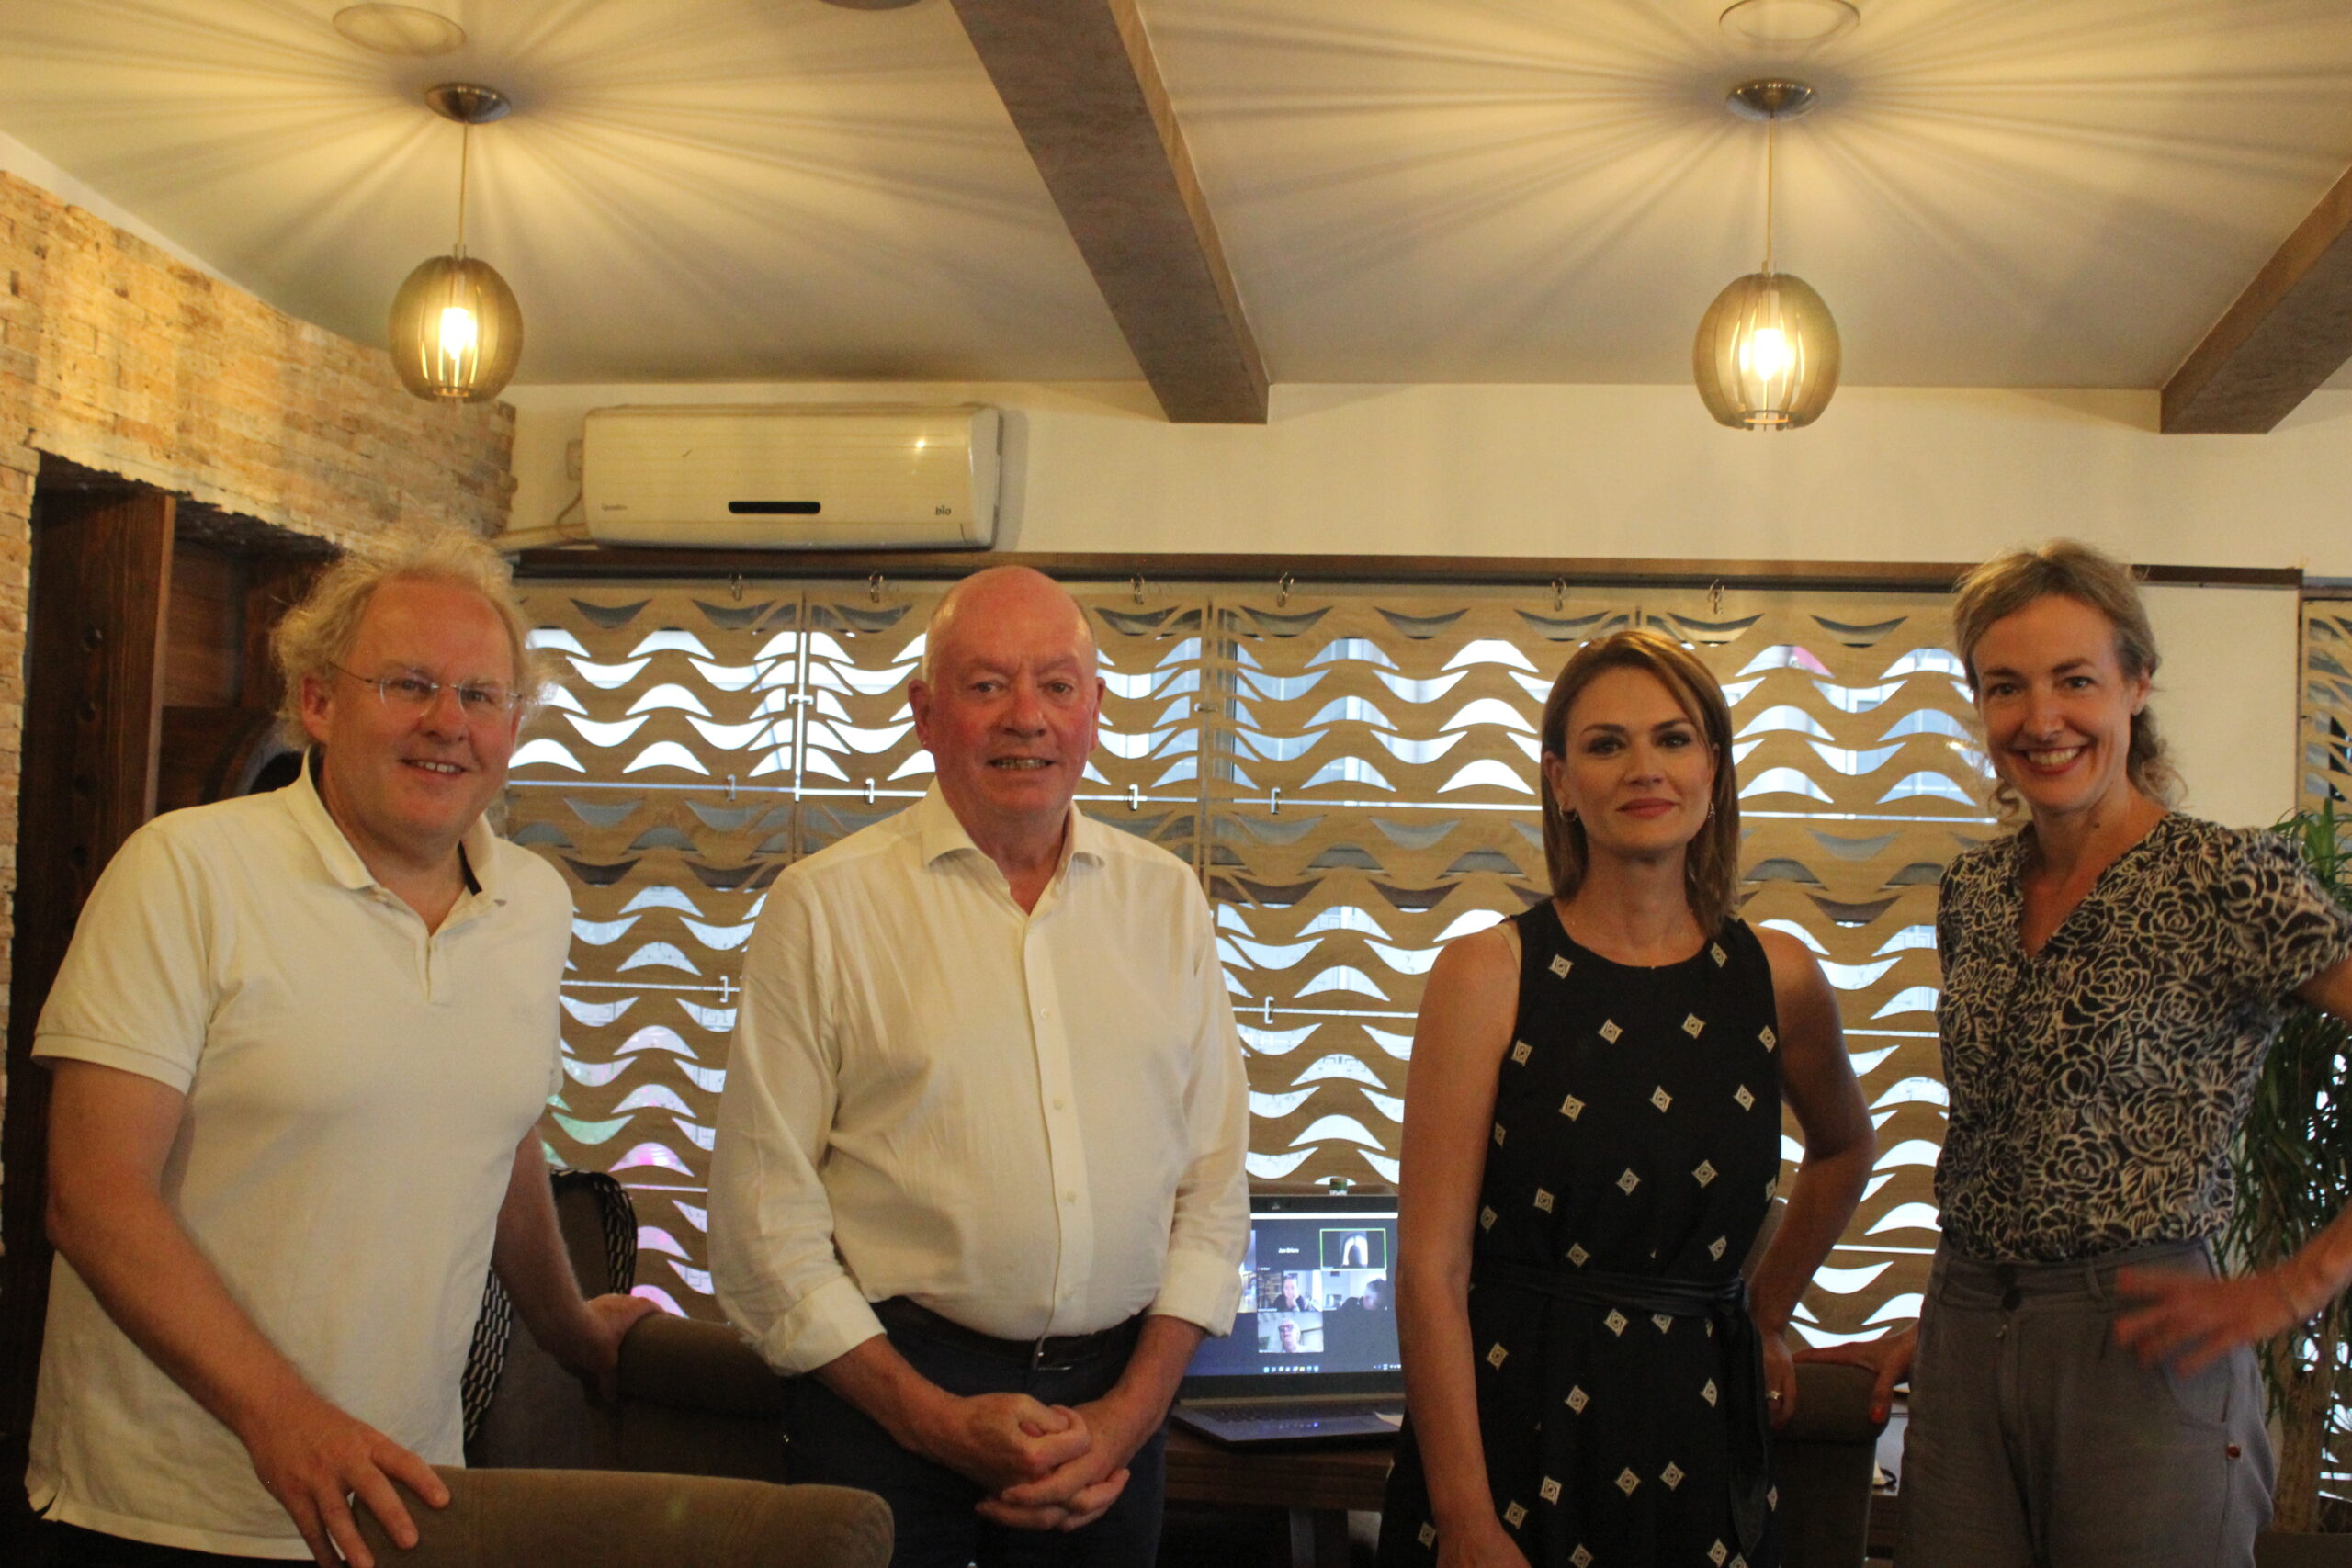 Distinguished representatives of EFA to be part of the gala opening ceremony of the 62nd Ohrid Summer Festival